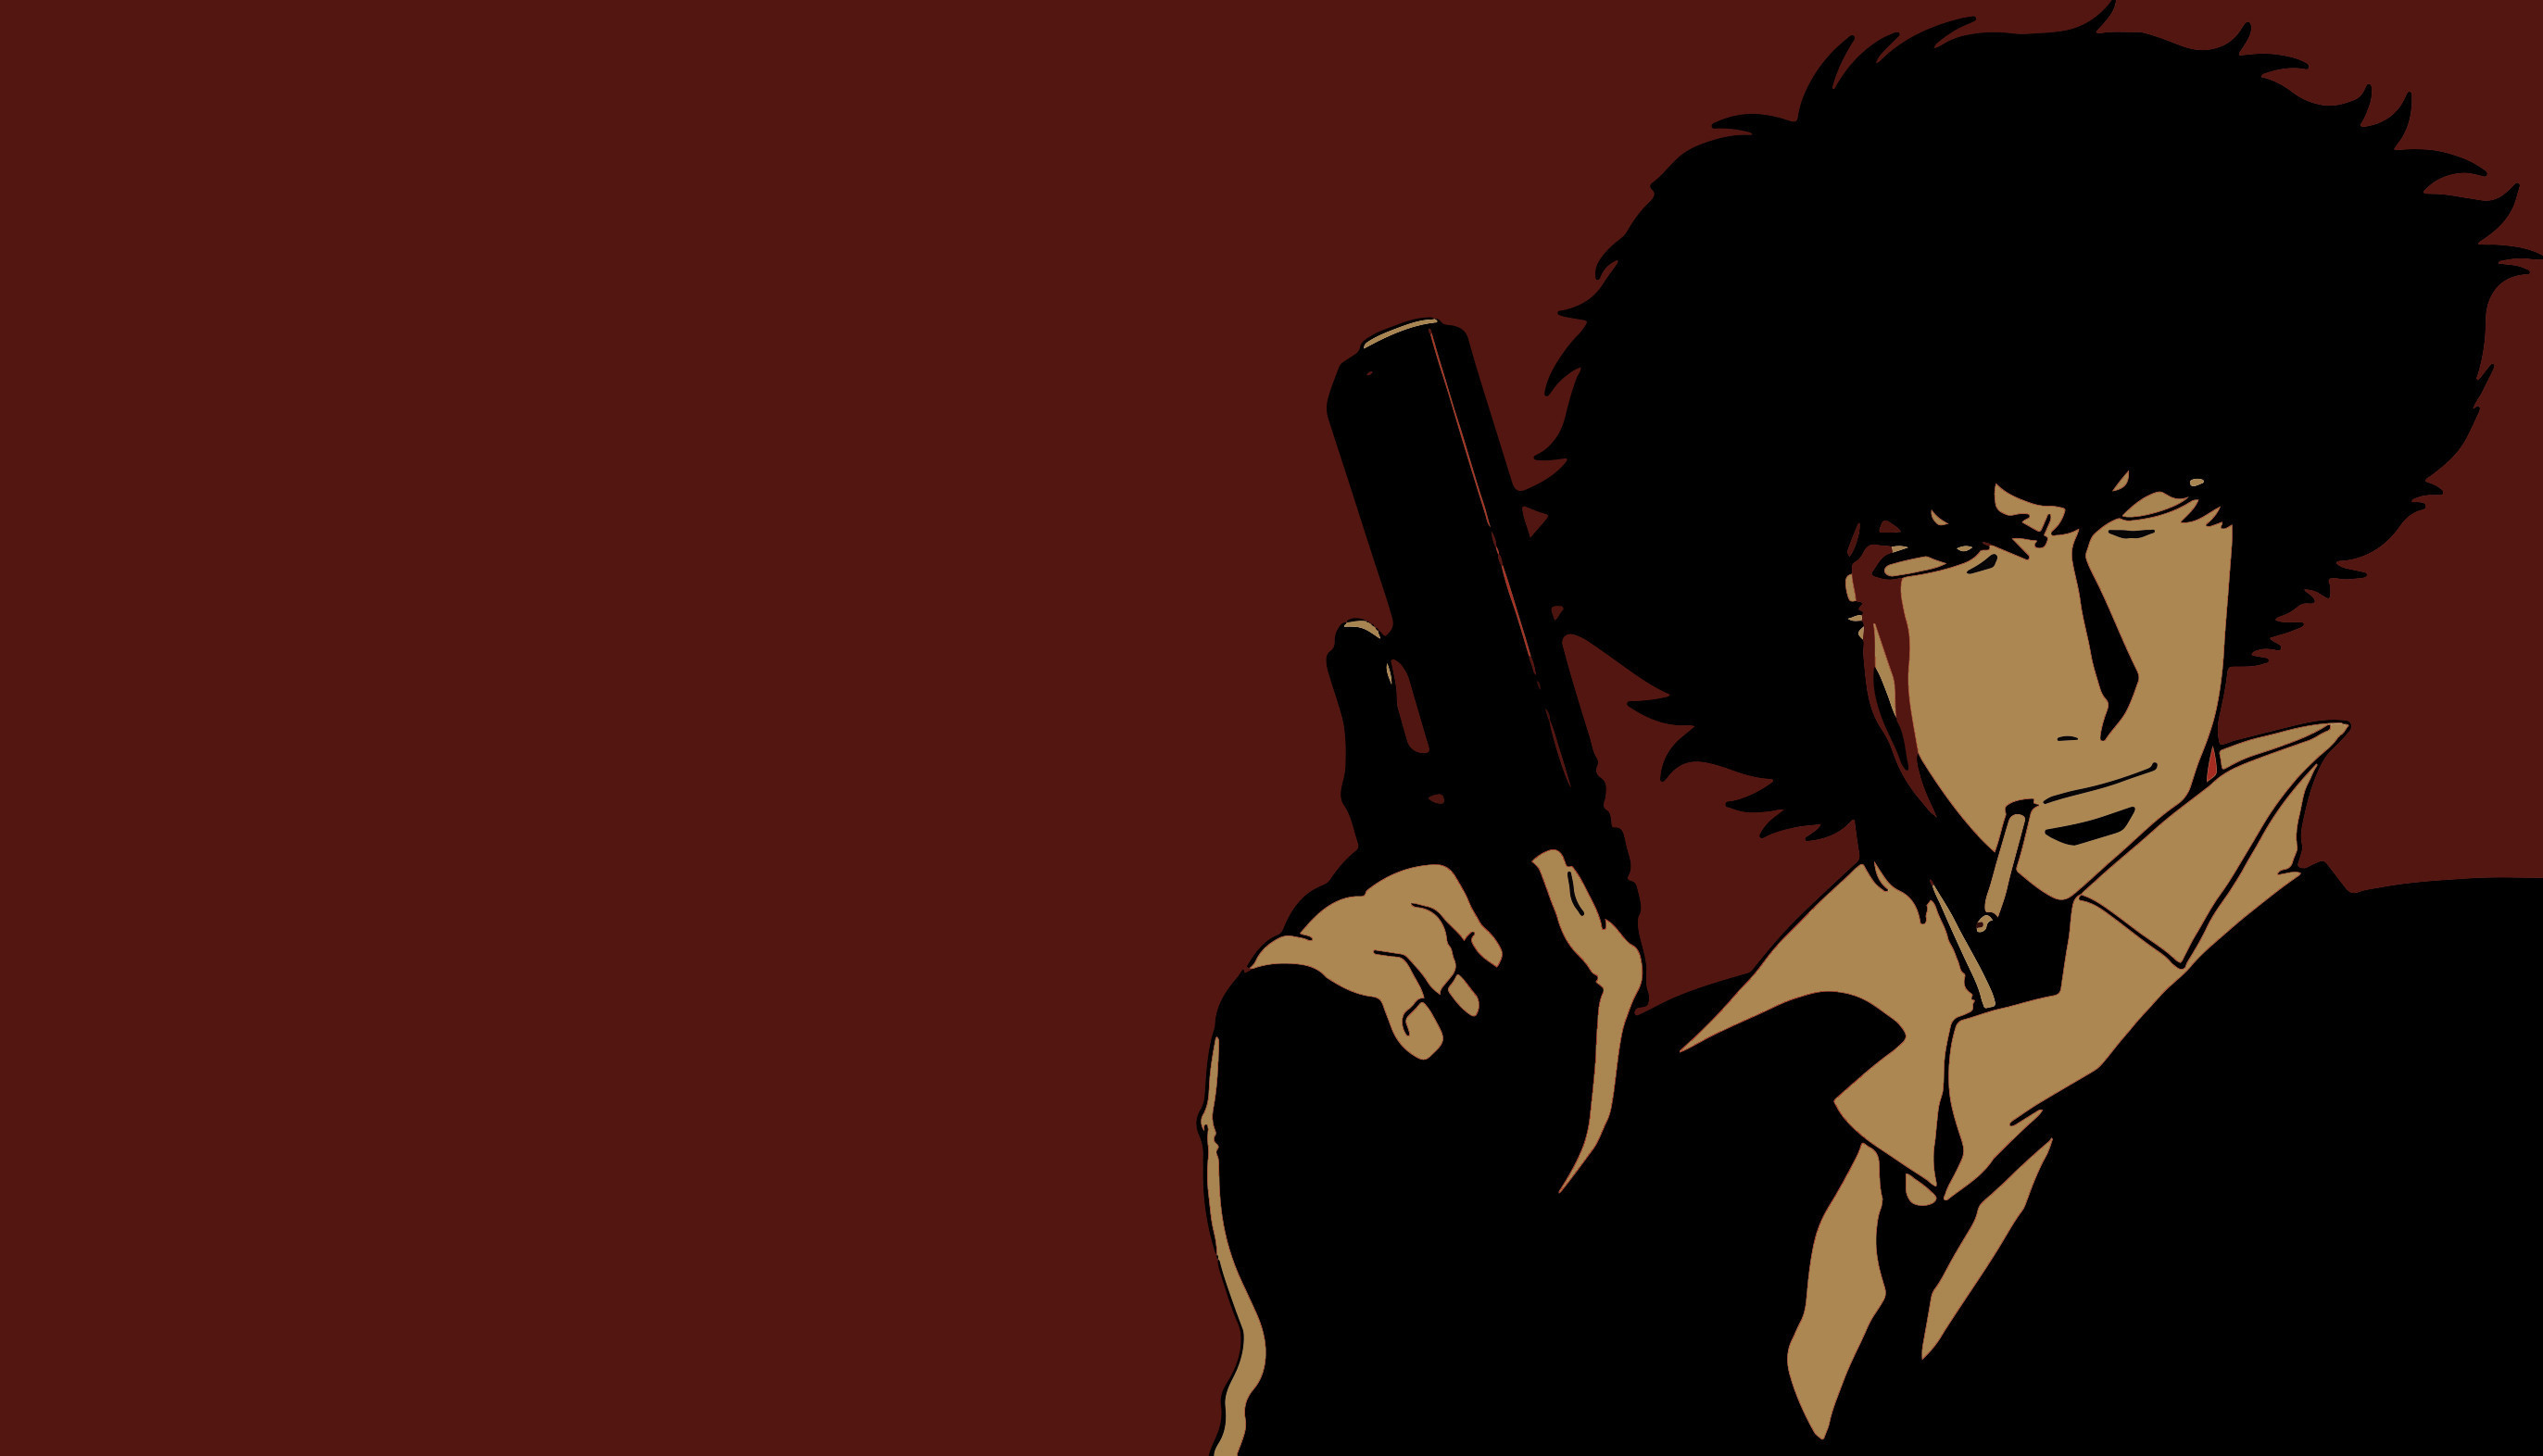 2745x1572 299 Cowboy Bebop HD Wallpapers | Backgrounds - Wallpaper Abyss .